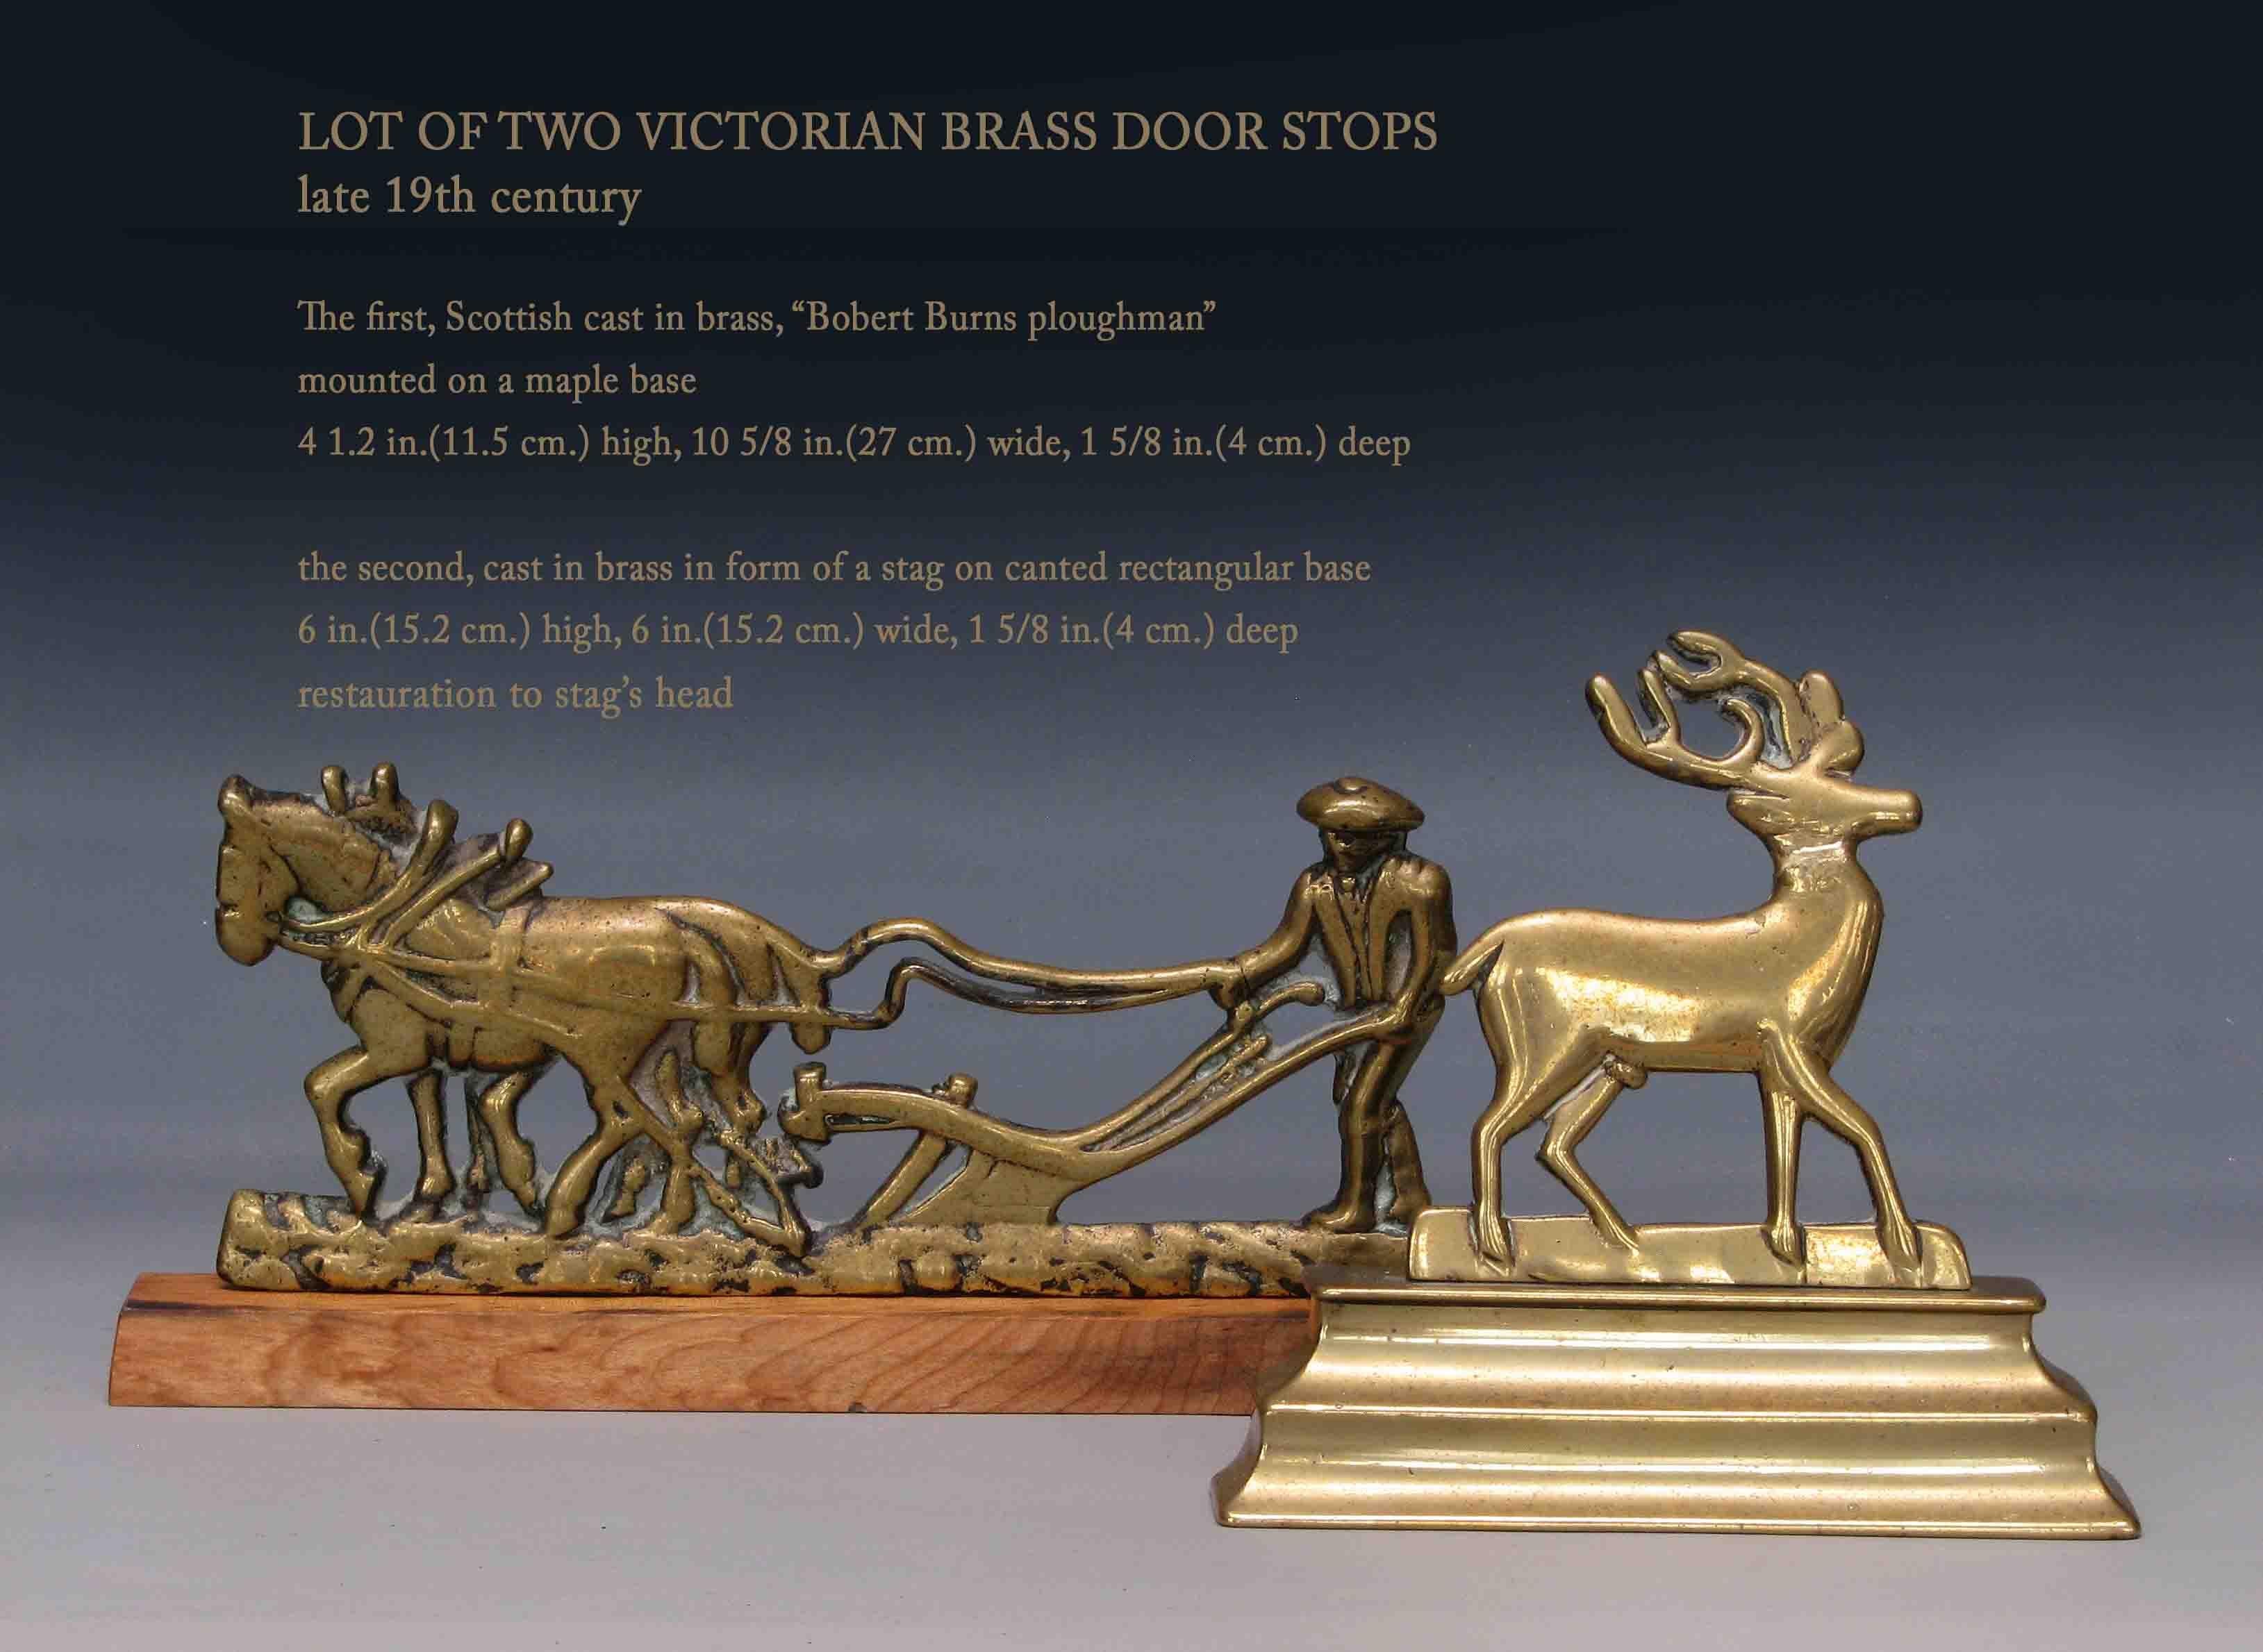 Lot of two victorian brass door stops
Late 19th century

The first, Scottish cast in brass, “Bobert Burns ploughman”.
Mounted on a maple base.
Measures: 4 1/2